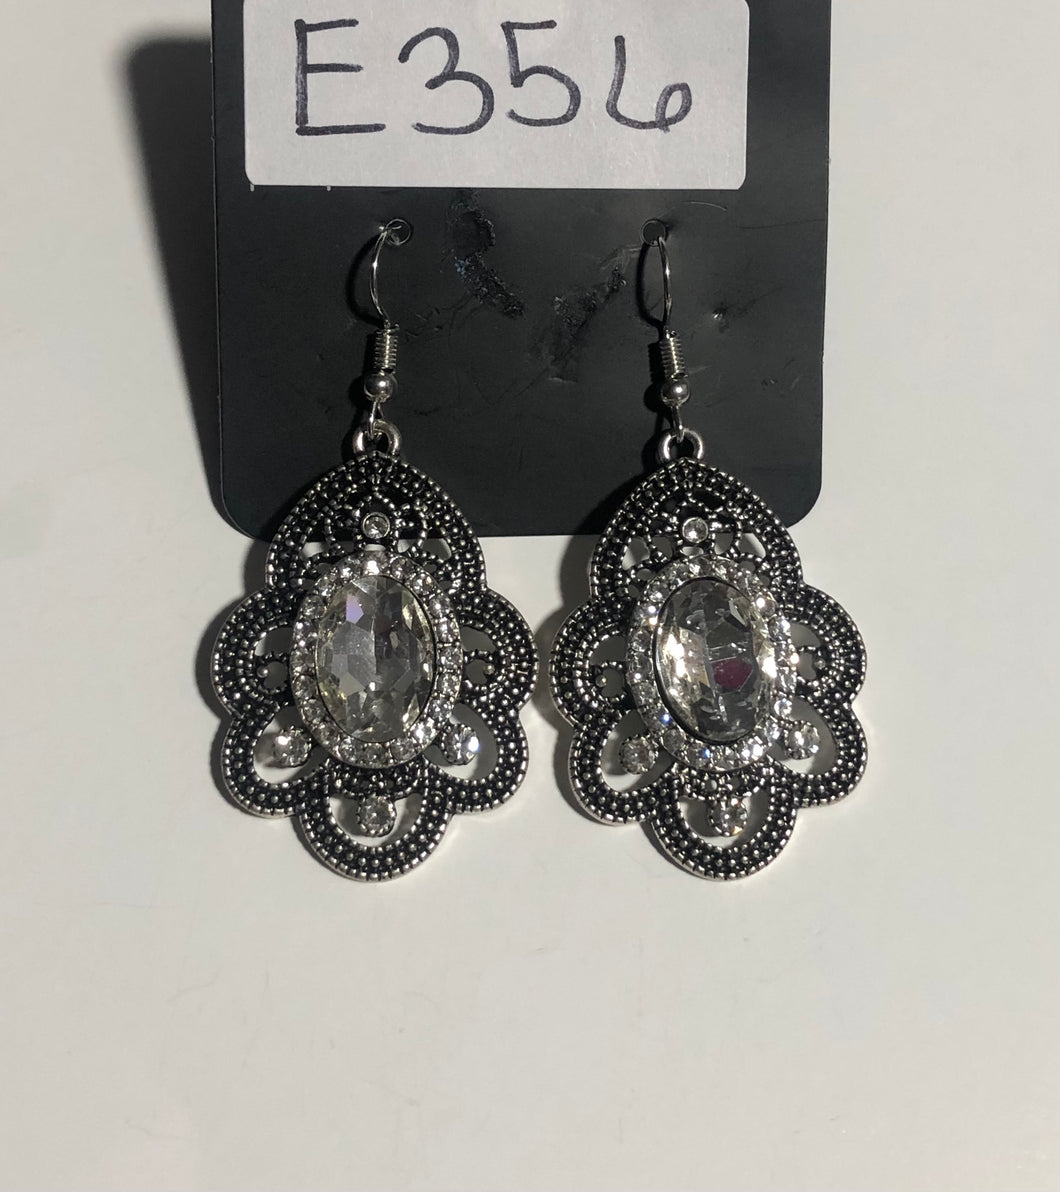 Reign Supreme - White - Rhinestones - Antiqued Silver Earrings